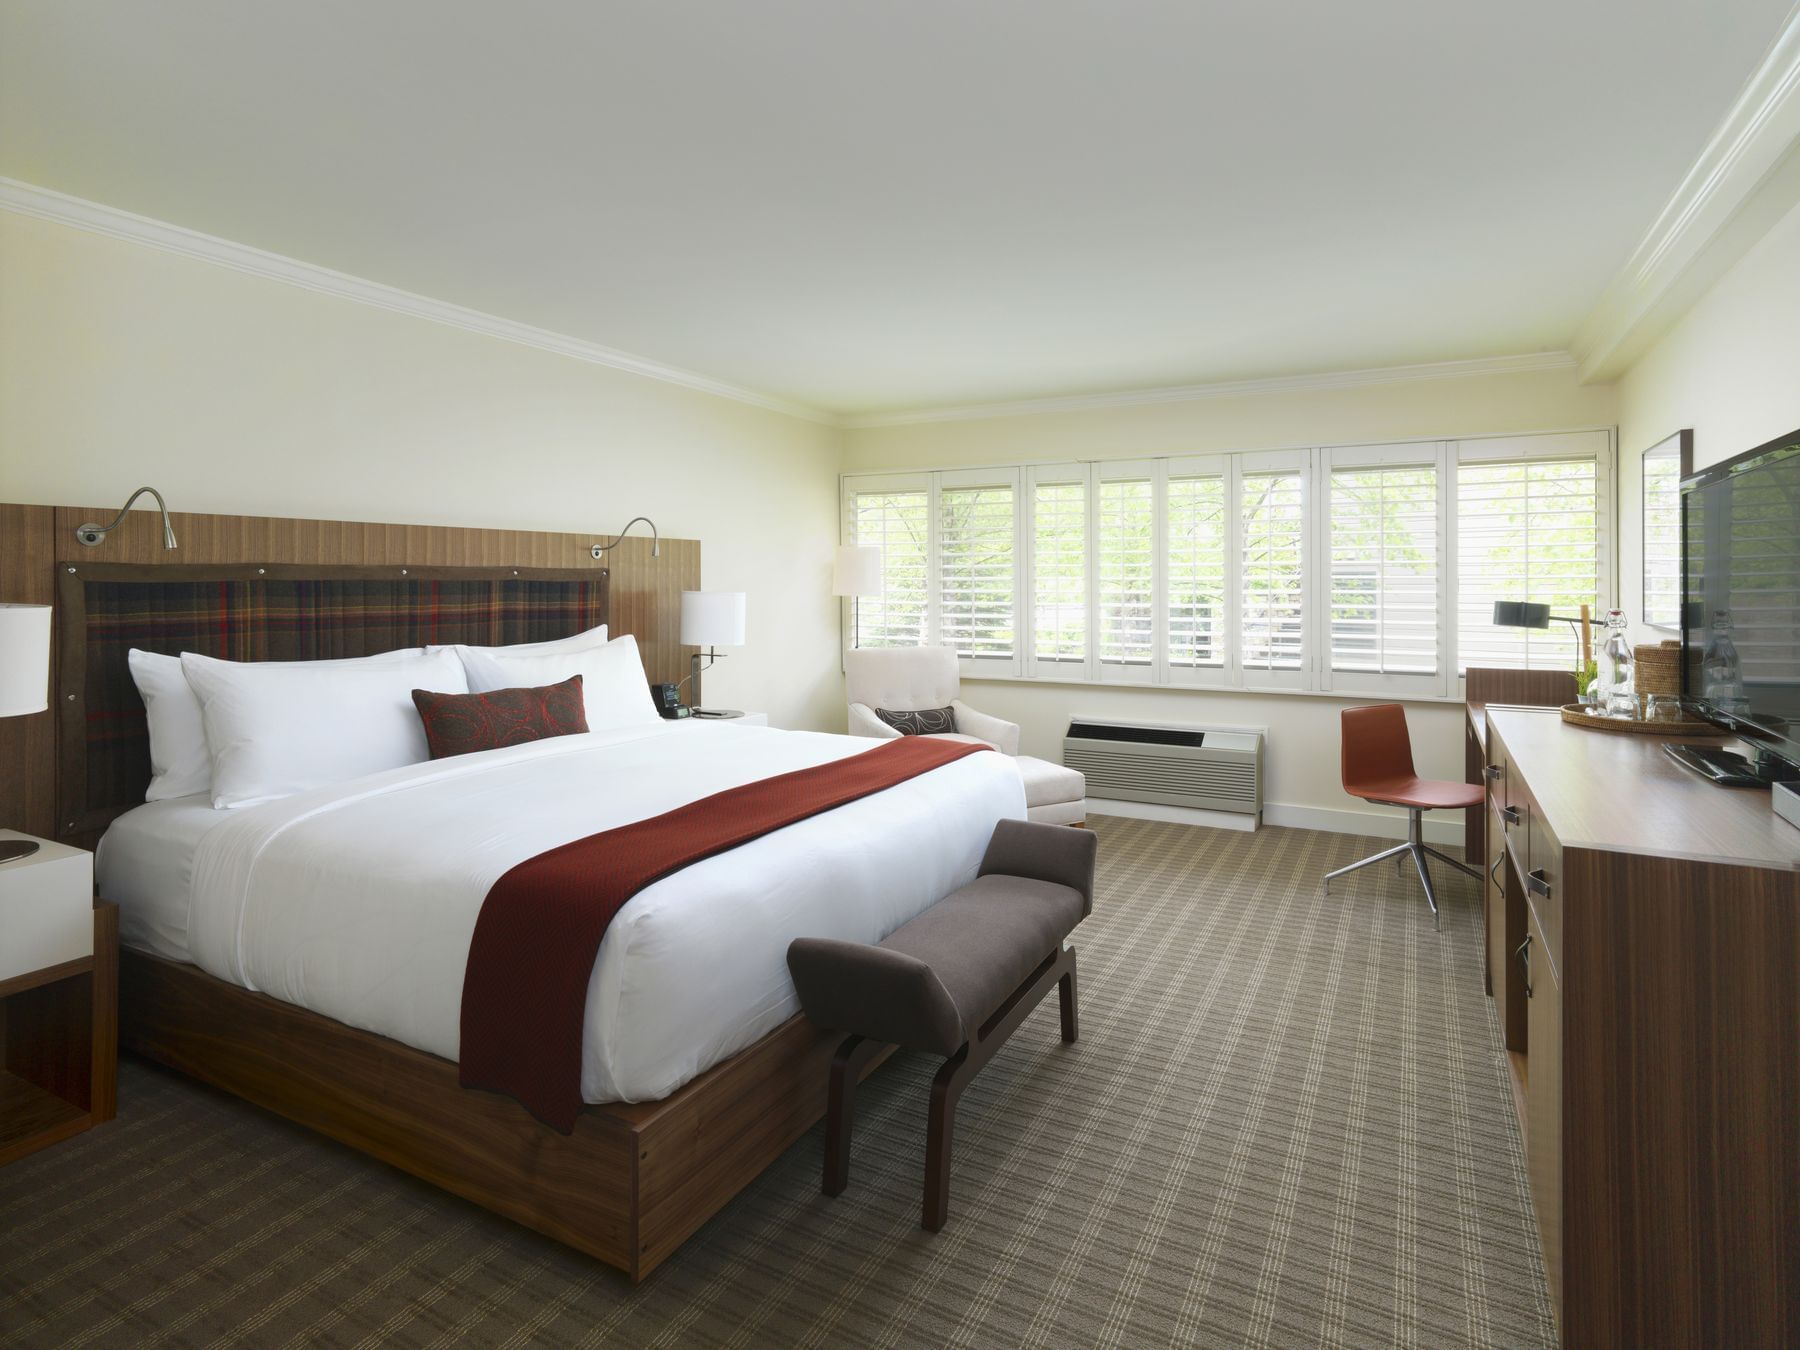 Deluxe King Room with one bed at Topnotch Stowe Resort